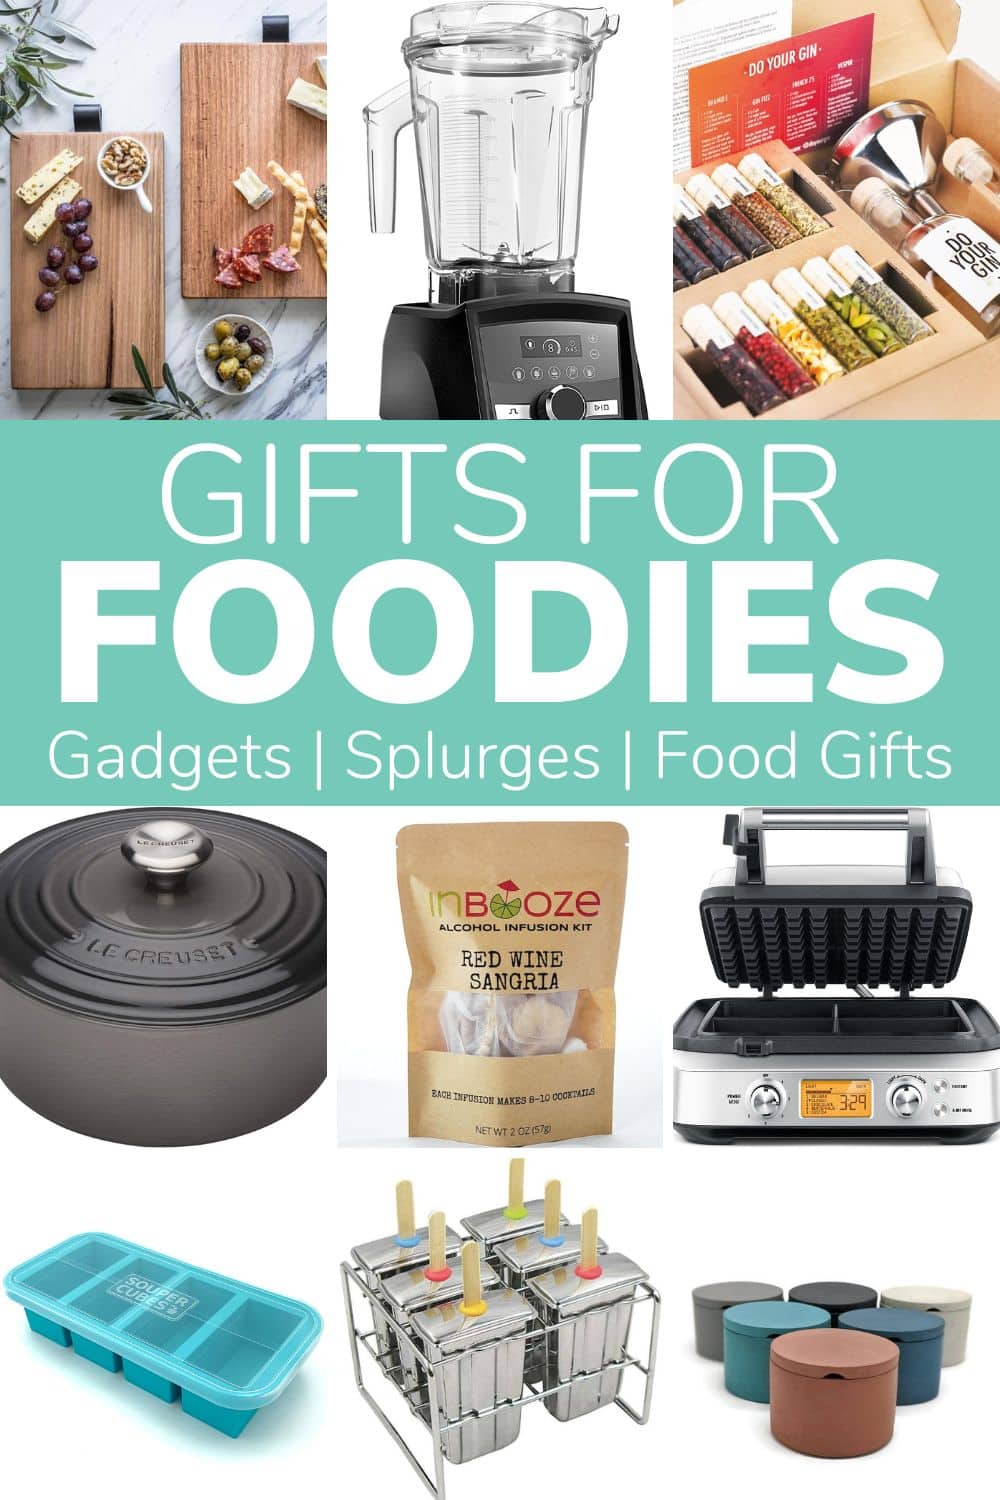 Pinterest graphic showing gifts for foodies.